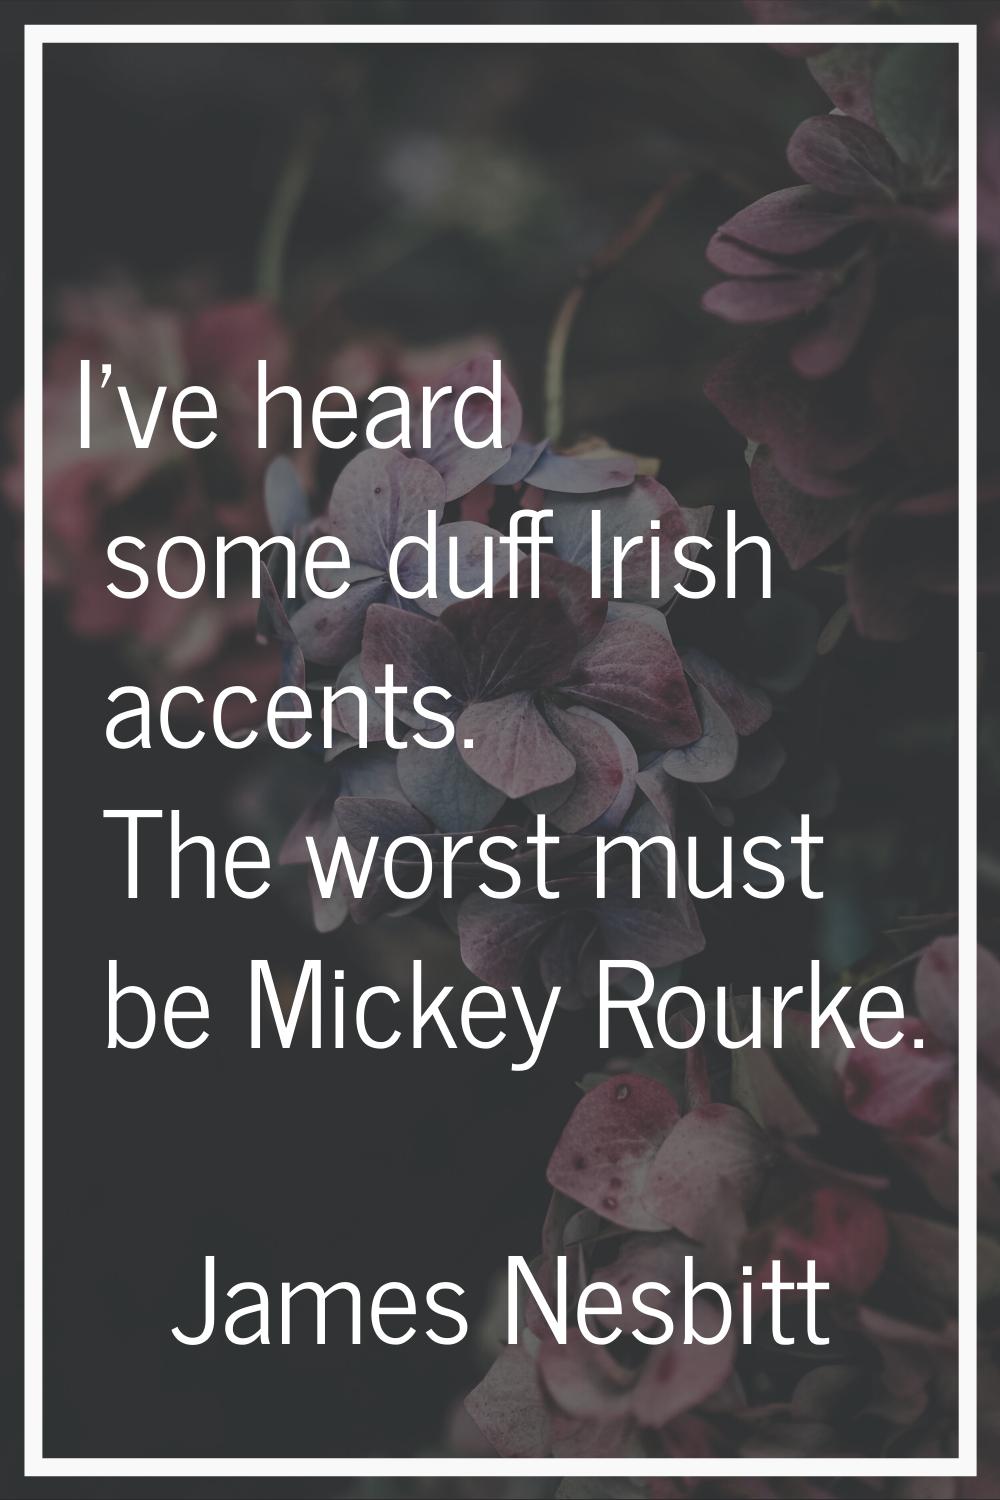 I've heard some duff Irish accents. The worst must be Mickey Rourke.